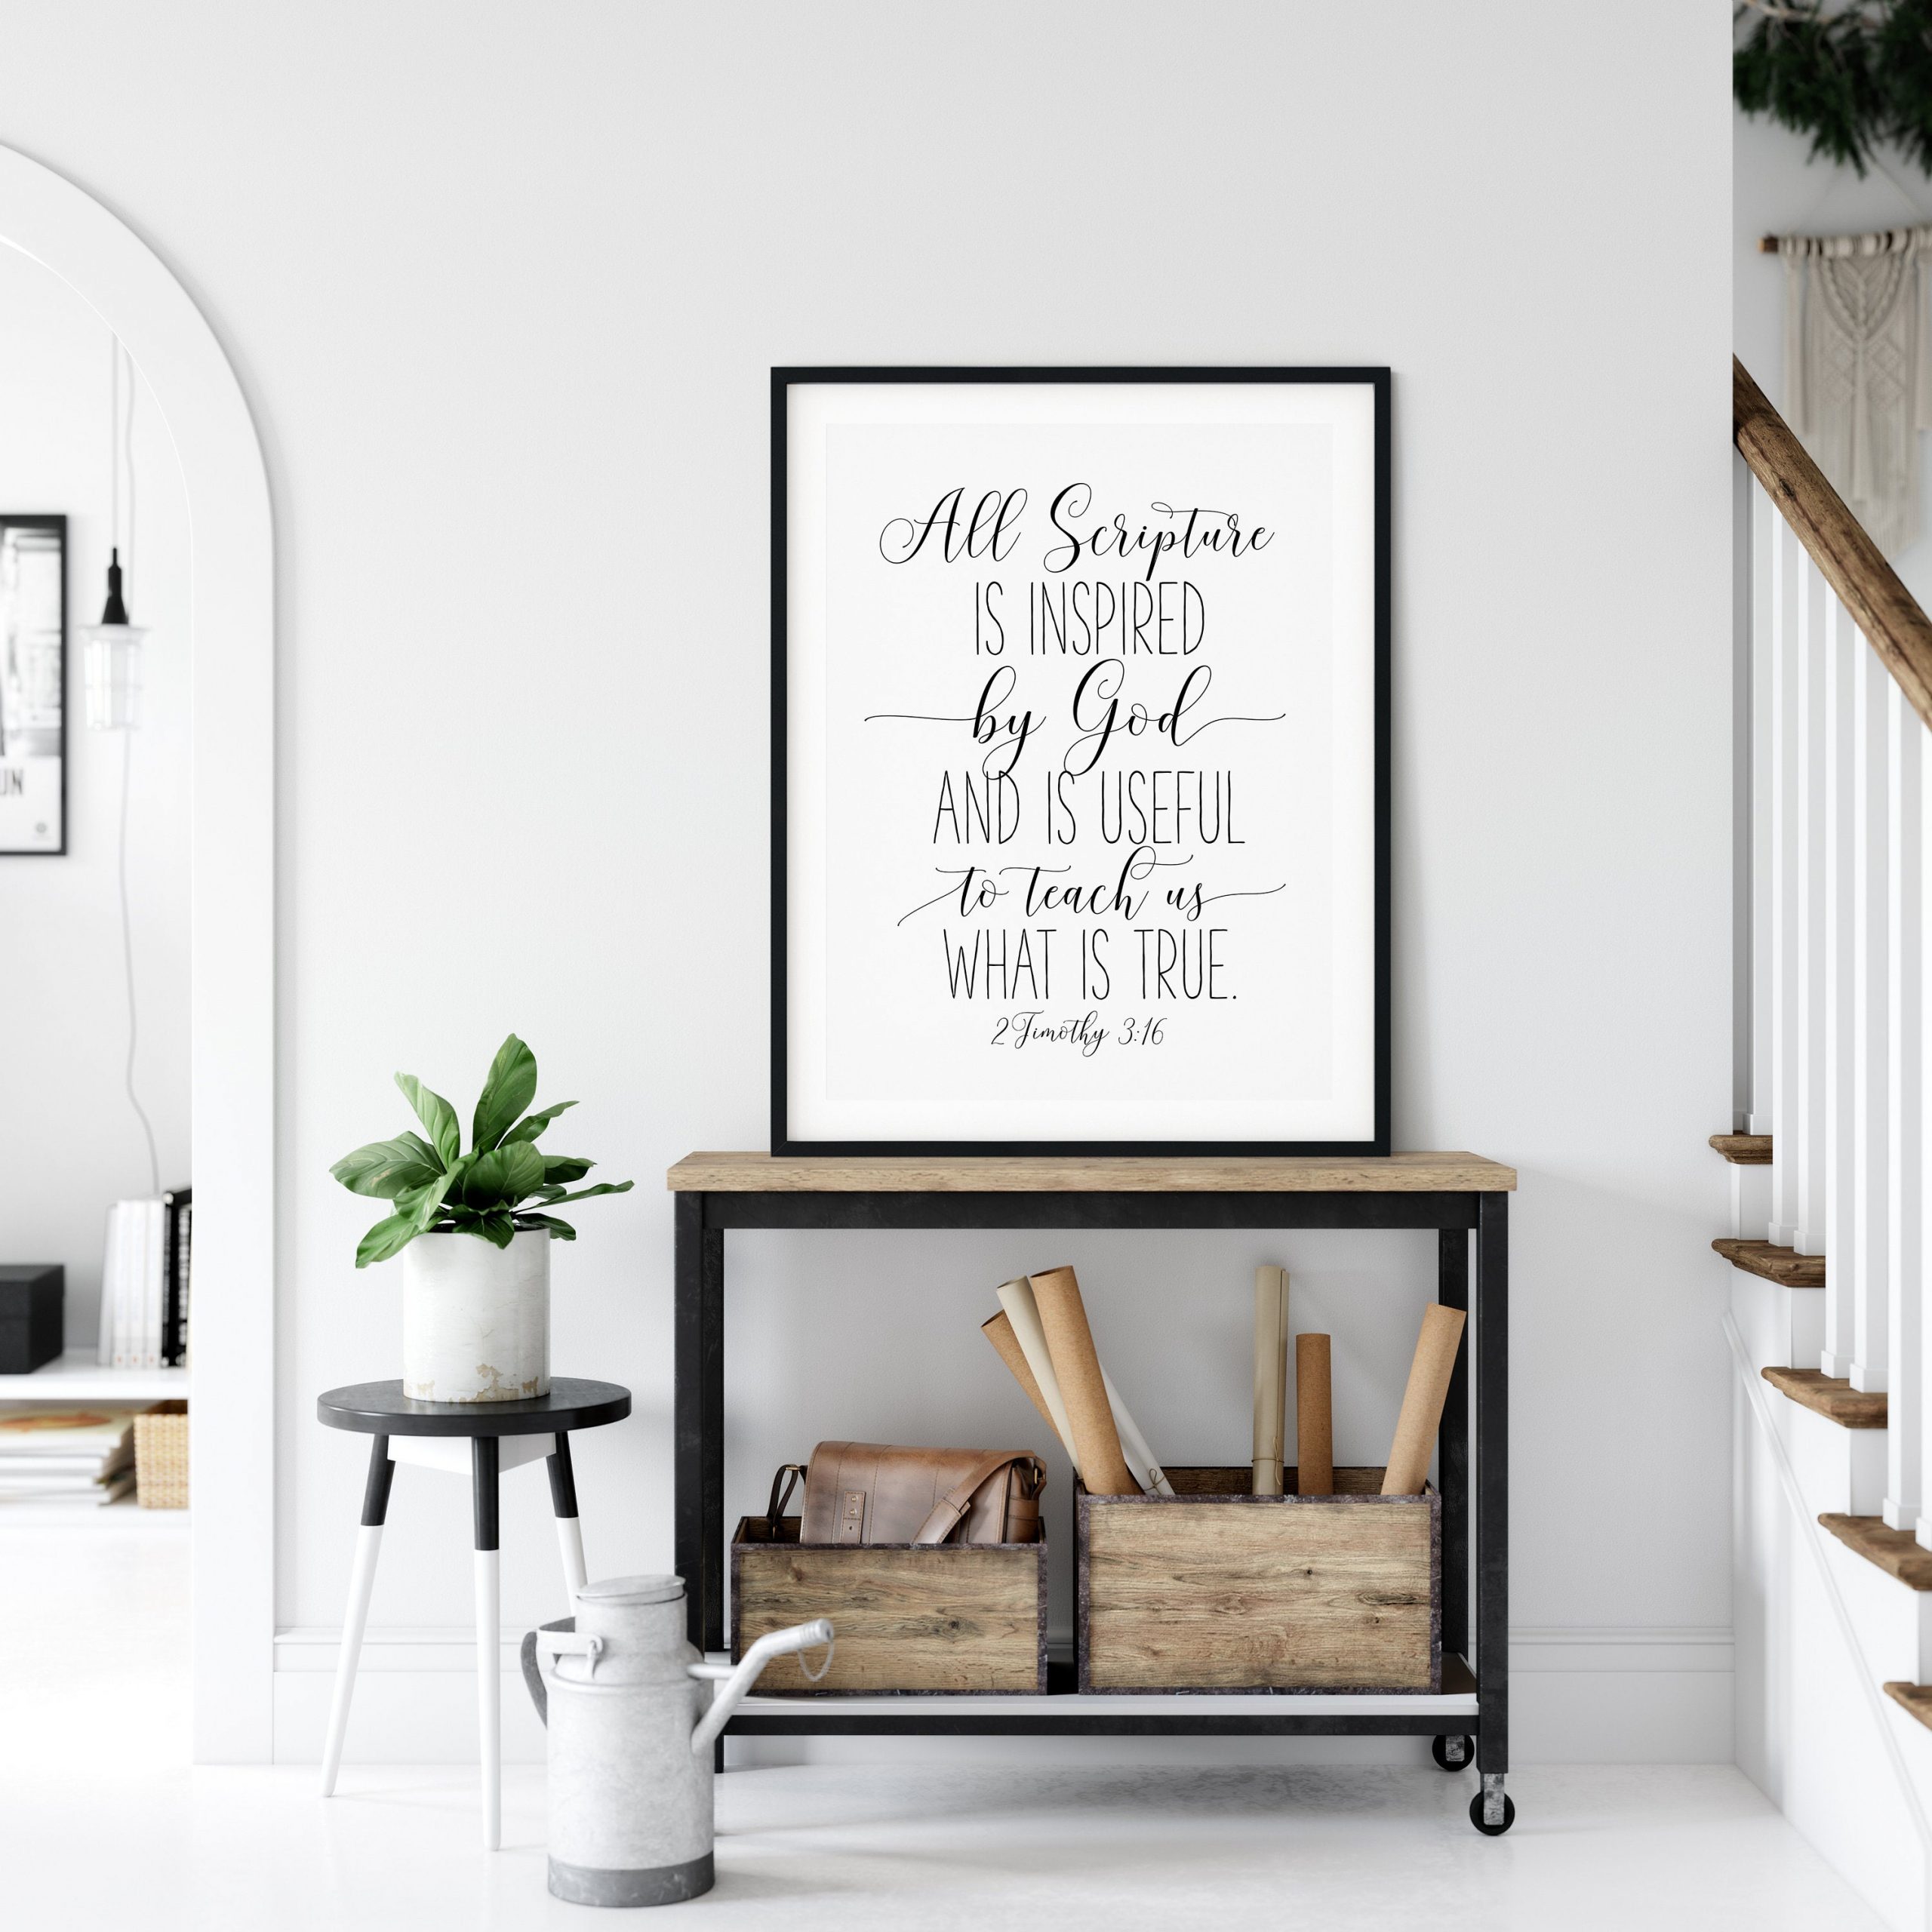 All Scripture Is Inspired By God, Romans 10:9, Bible Verse Printable Wall Art,Nursery Decor Print